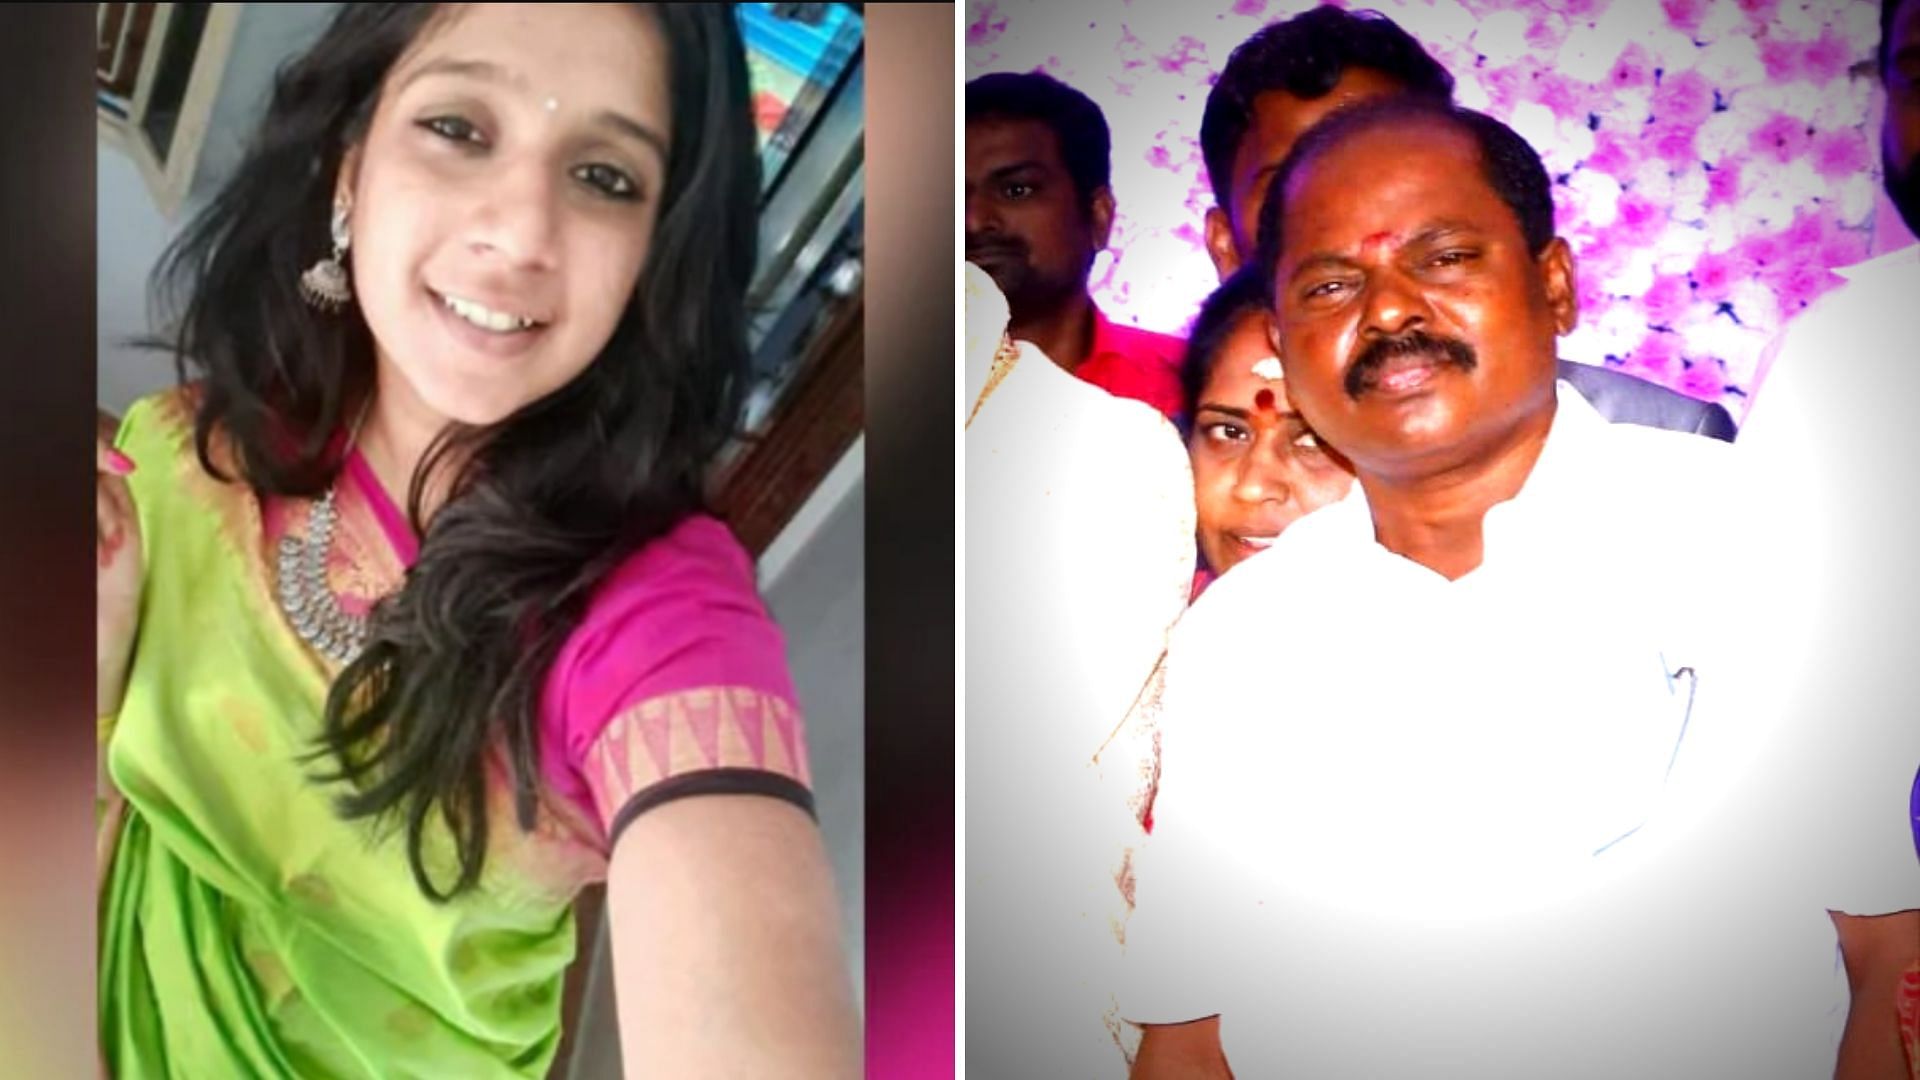 Former AIADMK councillor C Jayagopal has been arrested in Krishnagiri in connection with the death of 23-year-old Subhasri due to an illegal hoarding.